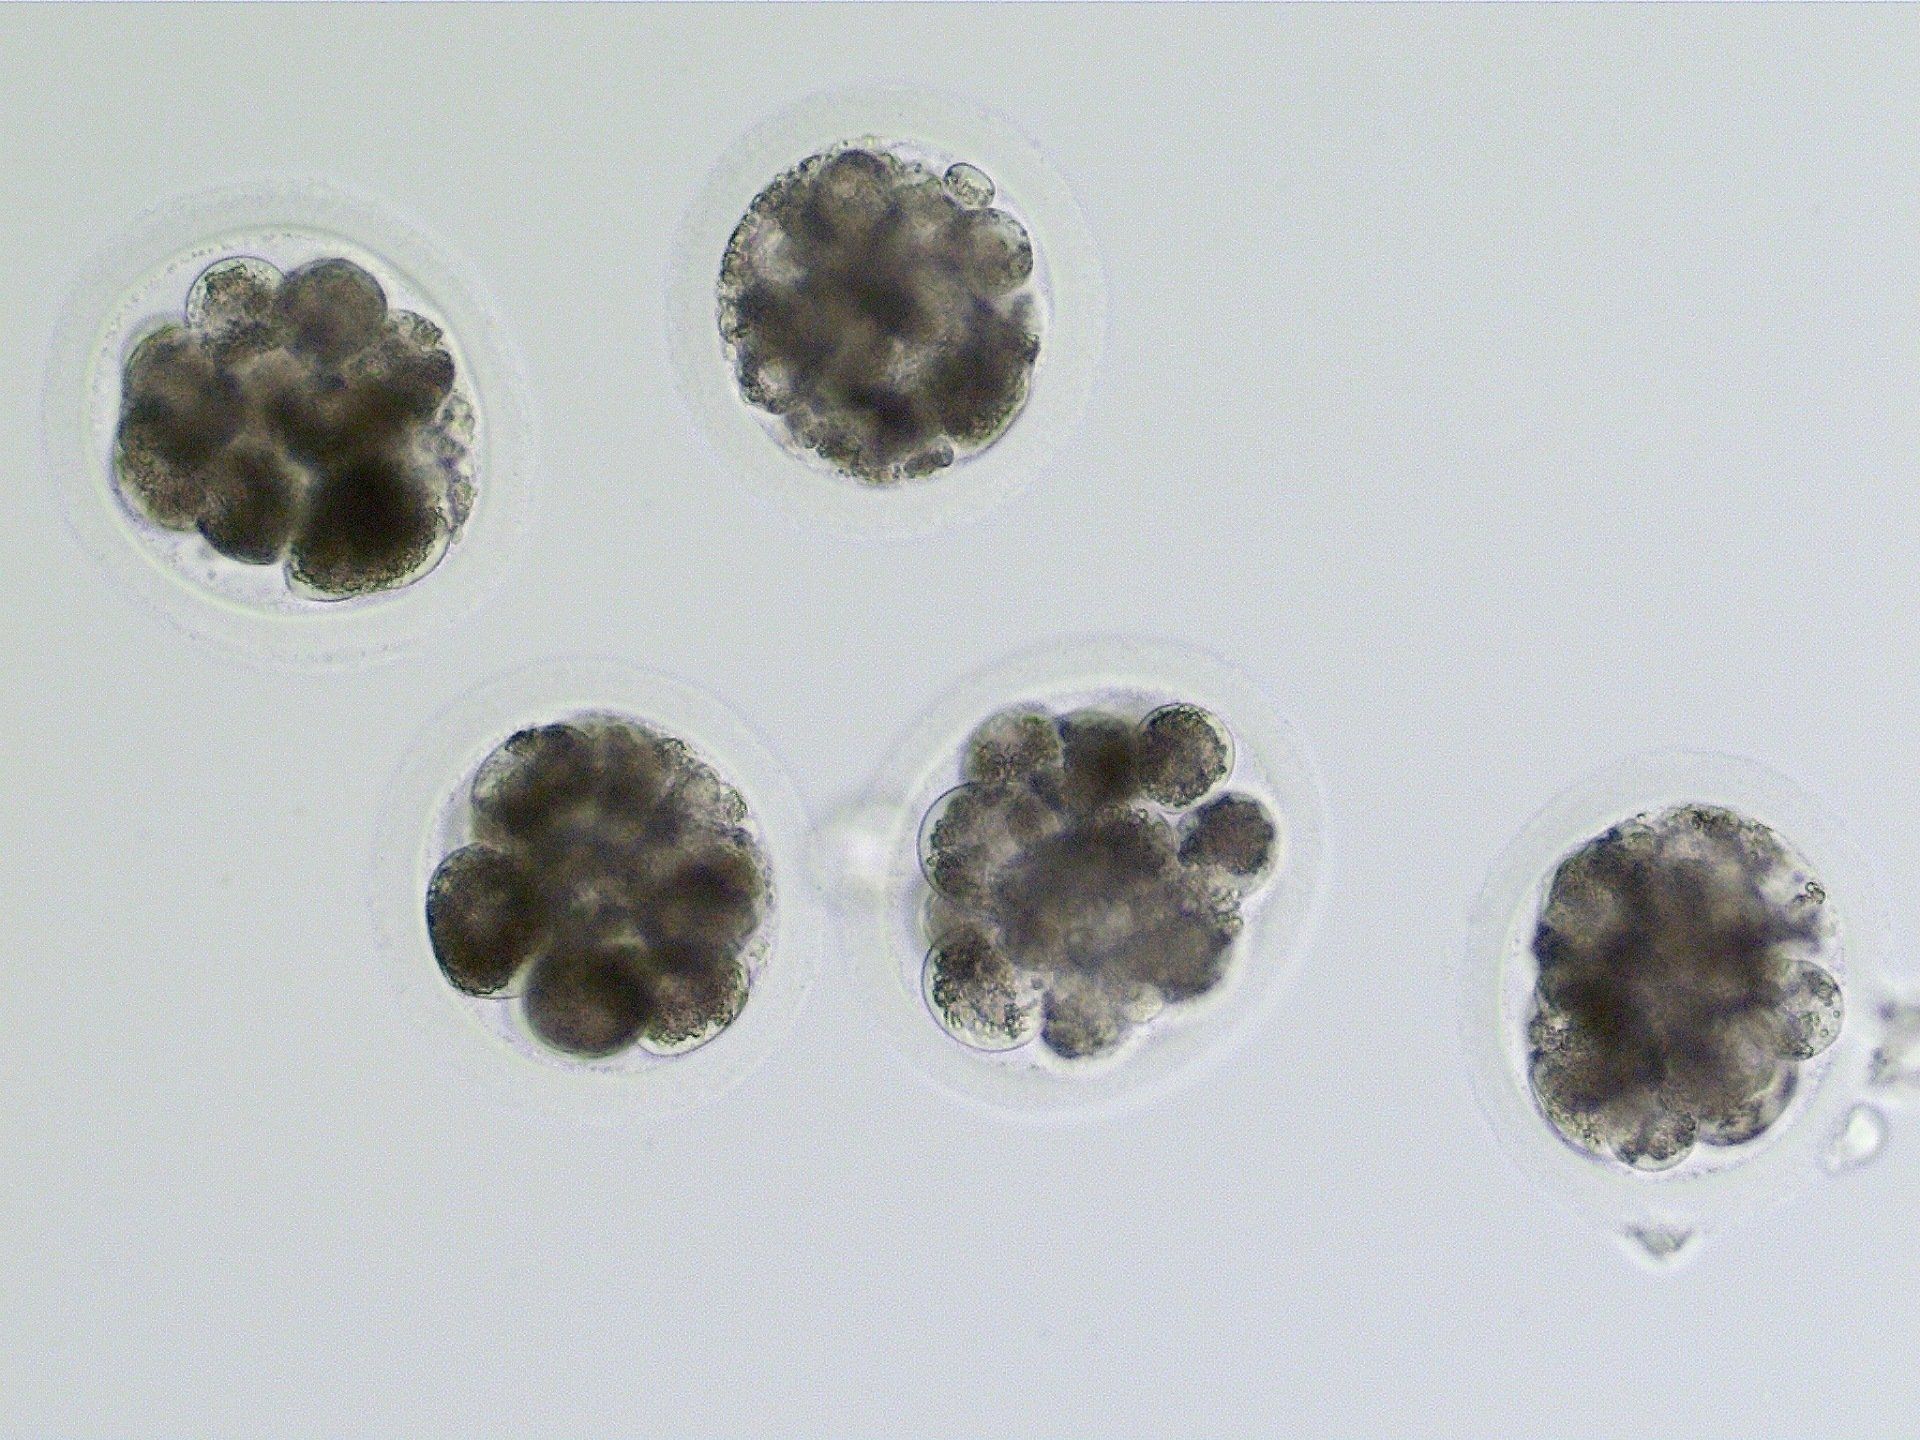 Day 4 embryos from a single mare. Only one of these embryos progressed to the blastocyst stage, was transferred, and established a pregnancy.